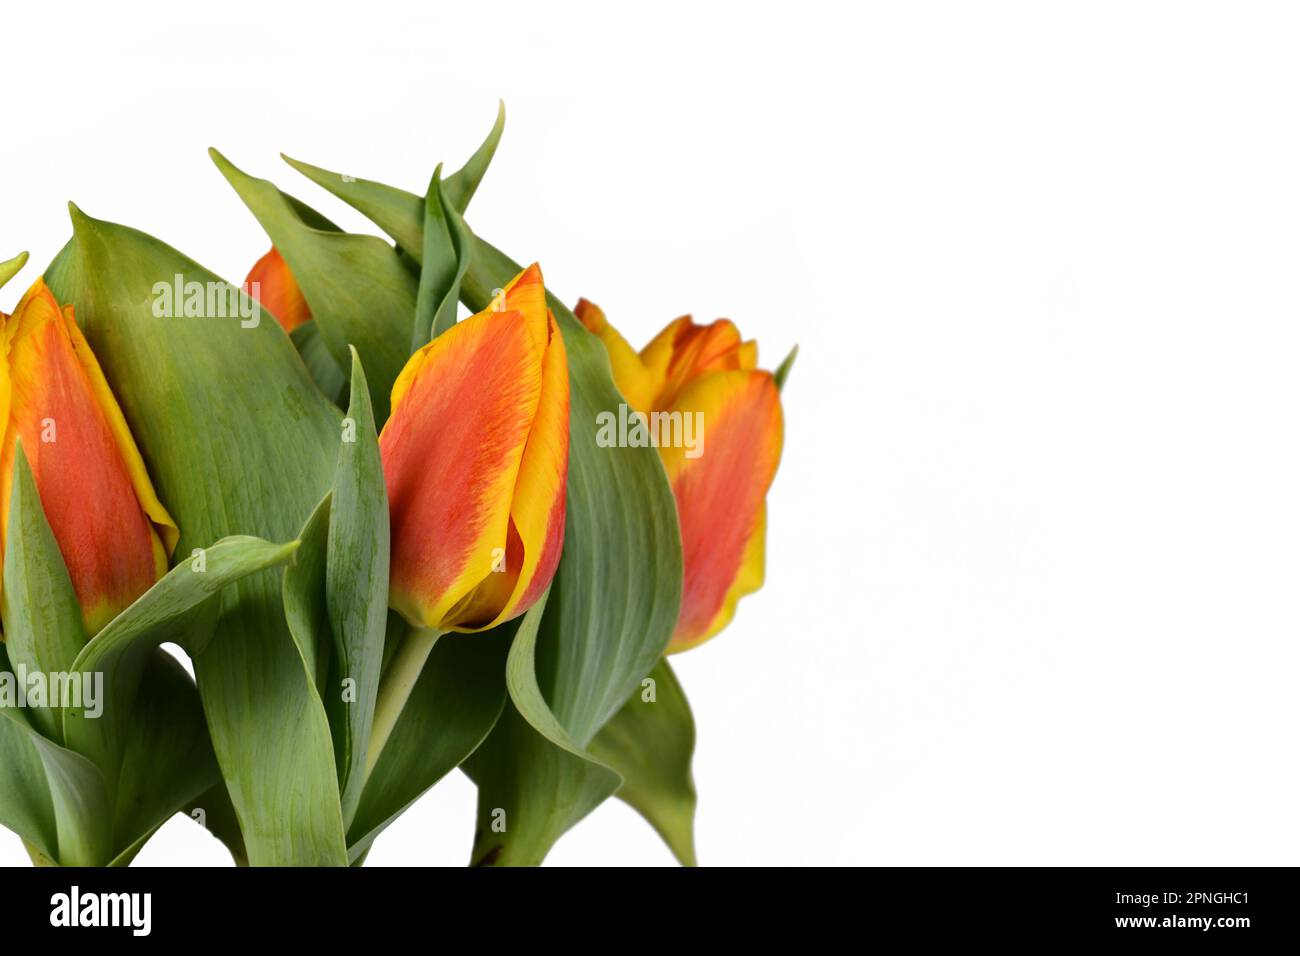 Two-colored orange and yellow 'Tulipa Flair' tulip on side of white background with copy space Stock Photo